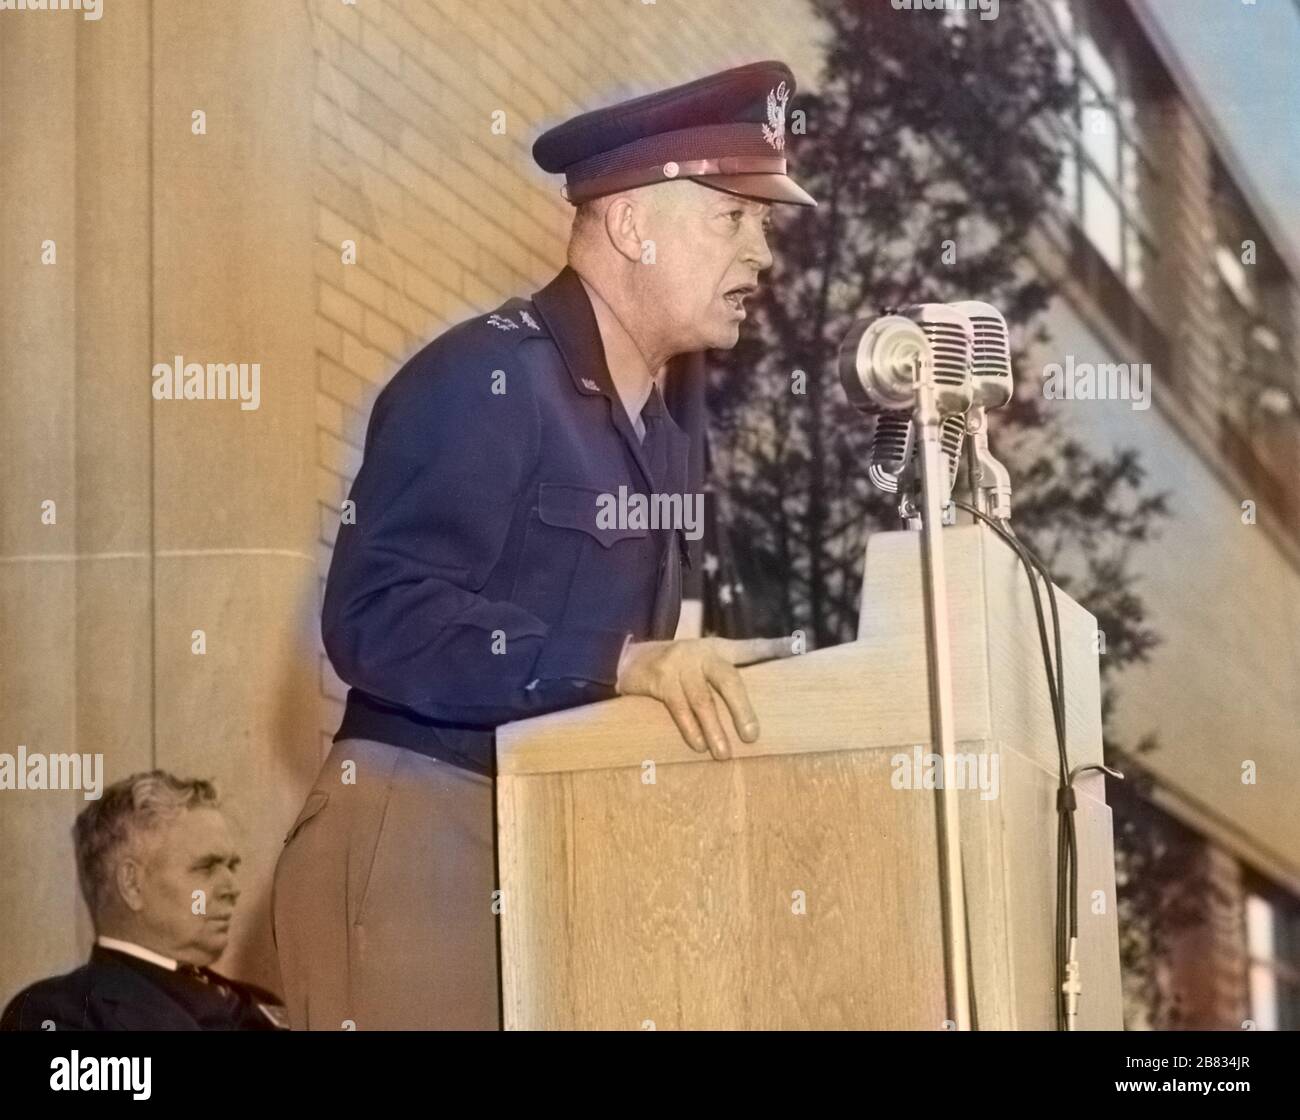 General Dwight D. Eisenhower holding a speech at the Aircraft Engine Research Laboratory, Cleveland, Ohio, Center Director Edward Ray Sharp sitting in the background, April 11, 1946. Image courtesy National Aeronautics and Space Administration (NASA). Note: Image has been digitally colorized using a modern process. Colors may not be period-accurate. () Stock Photo